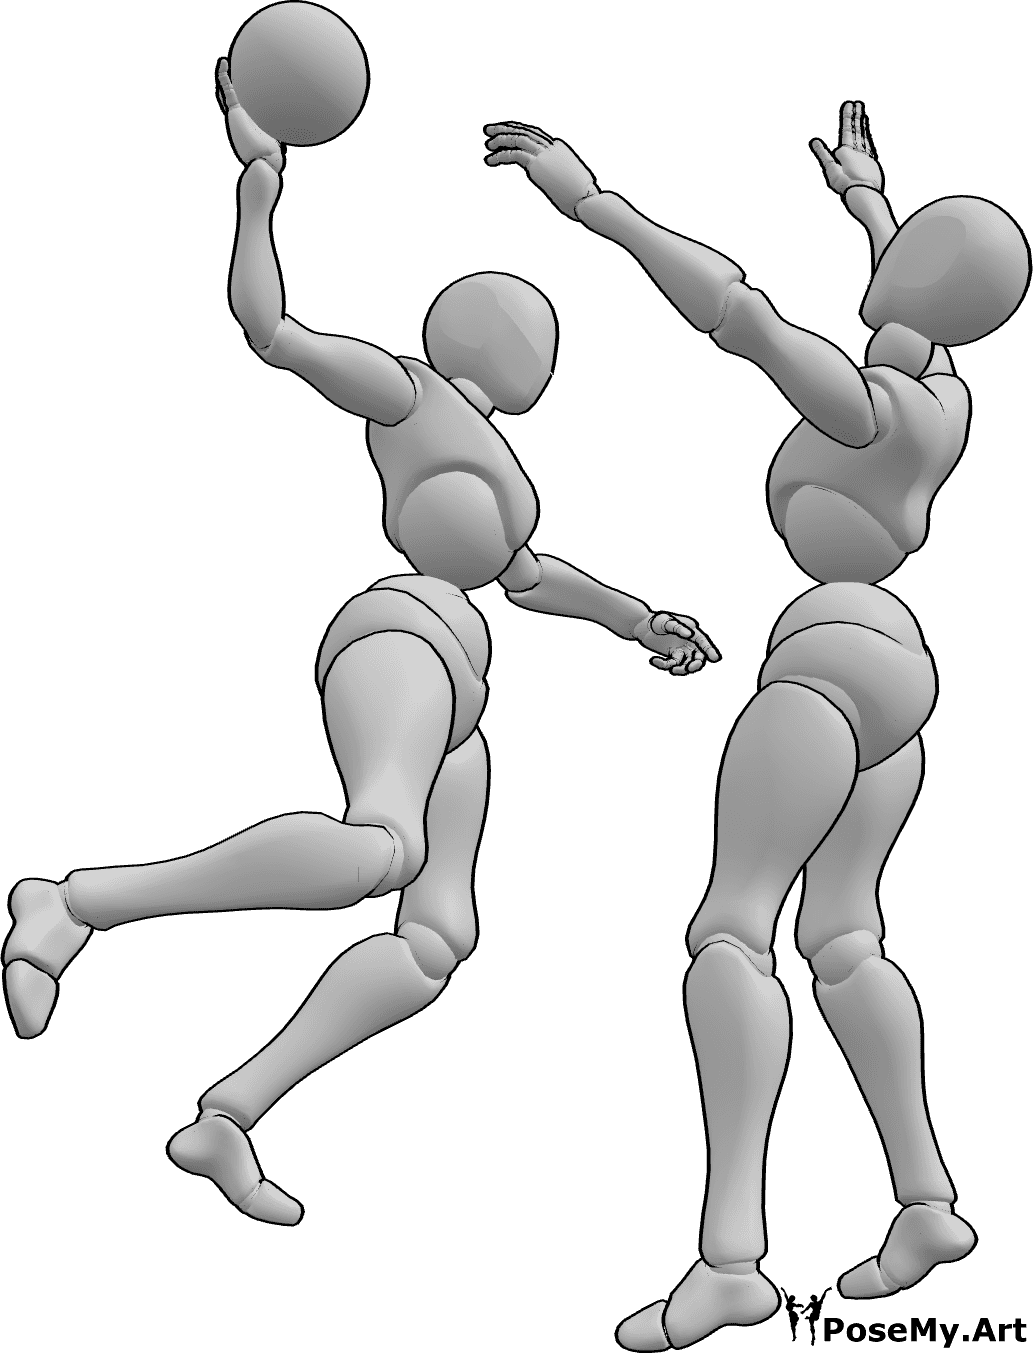 Pose Reference - Female players passing pose - Two females are playing handball, one of them is jumping and passing the ball